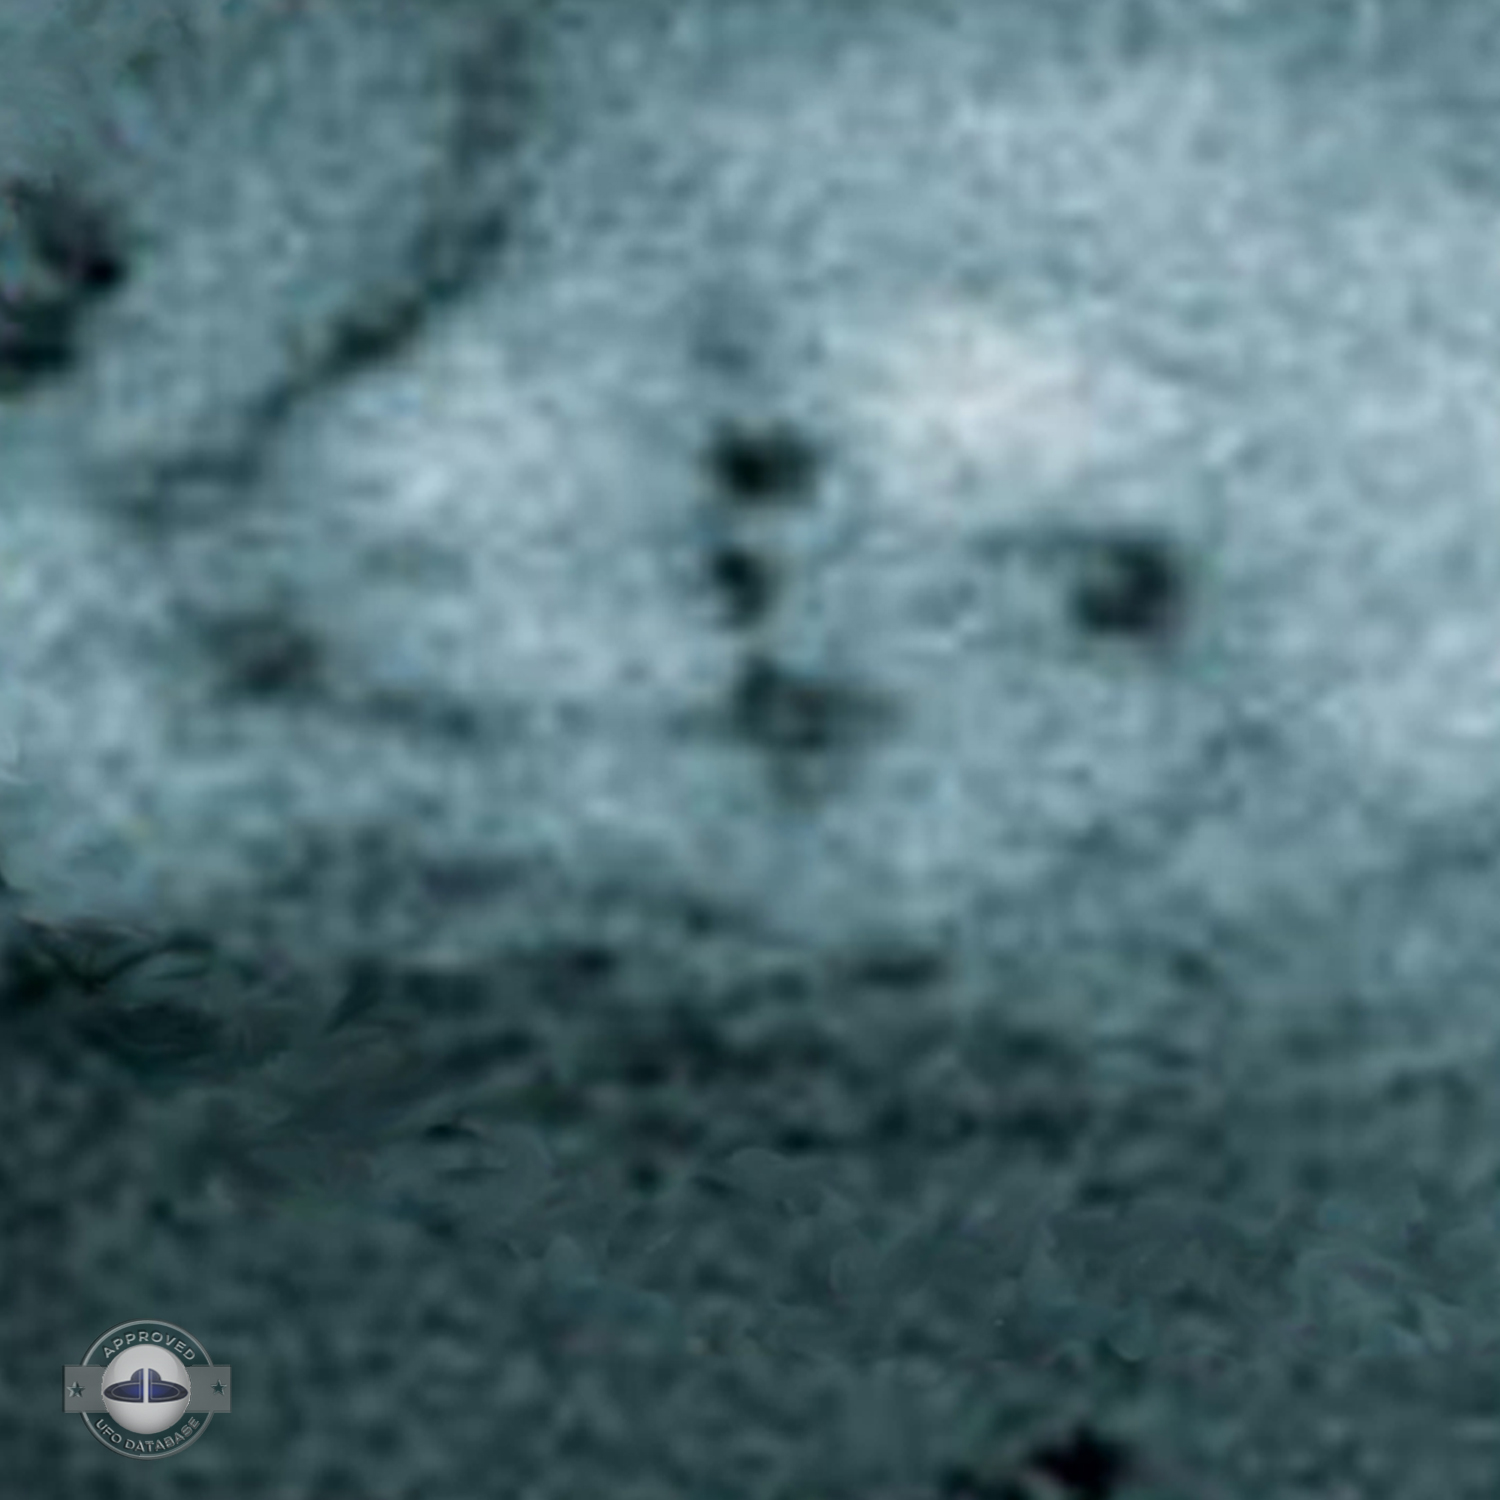 Huge UFO mothership moving in clouds over Guangzhou, Guangdong, China UFO Picture #176-5